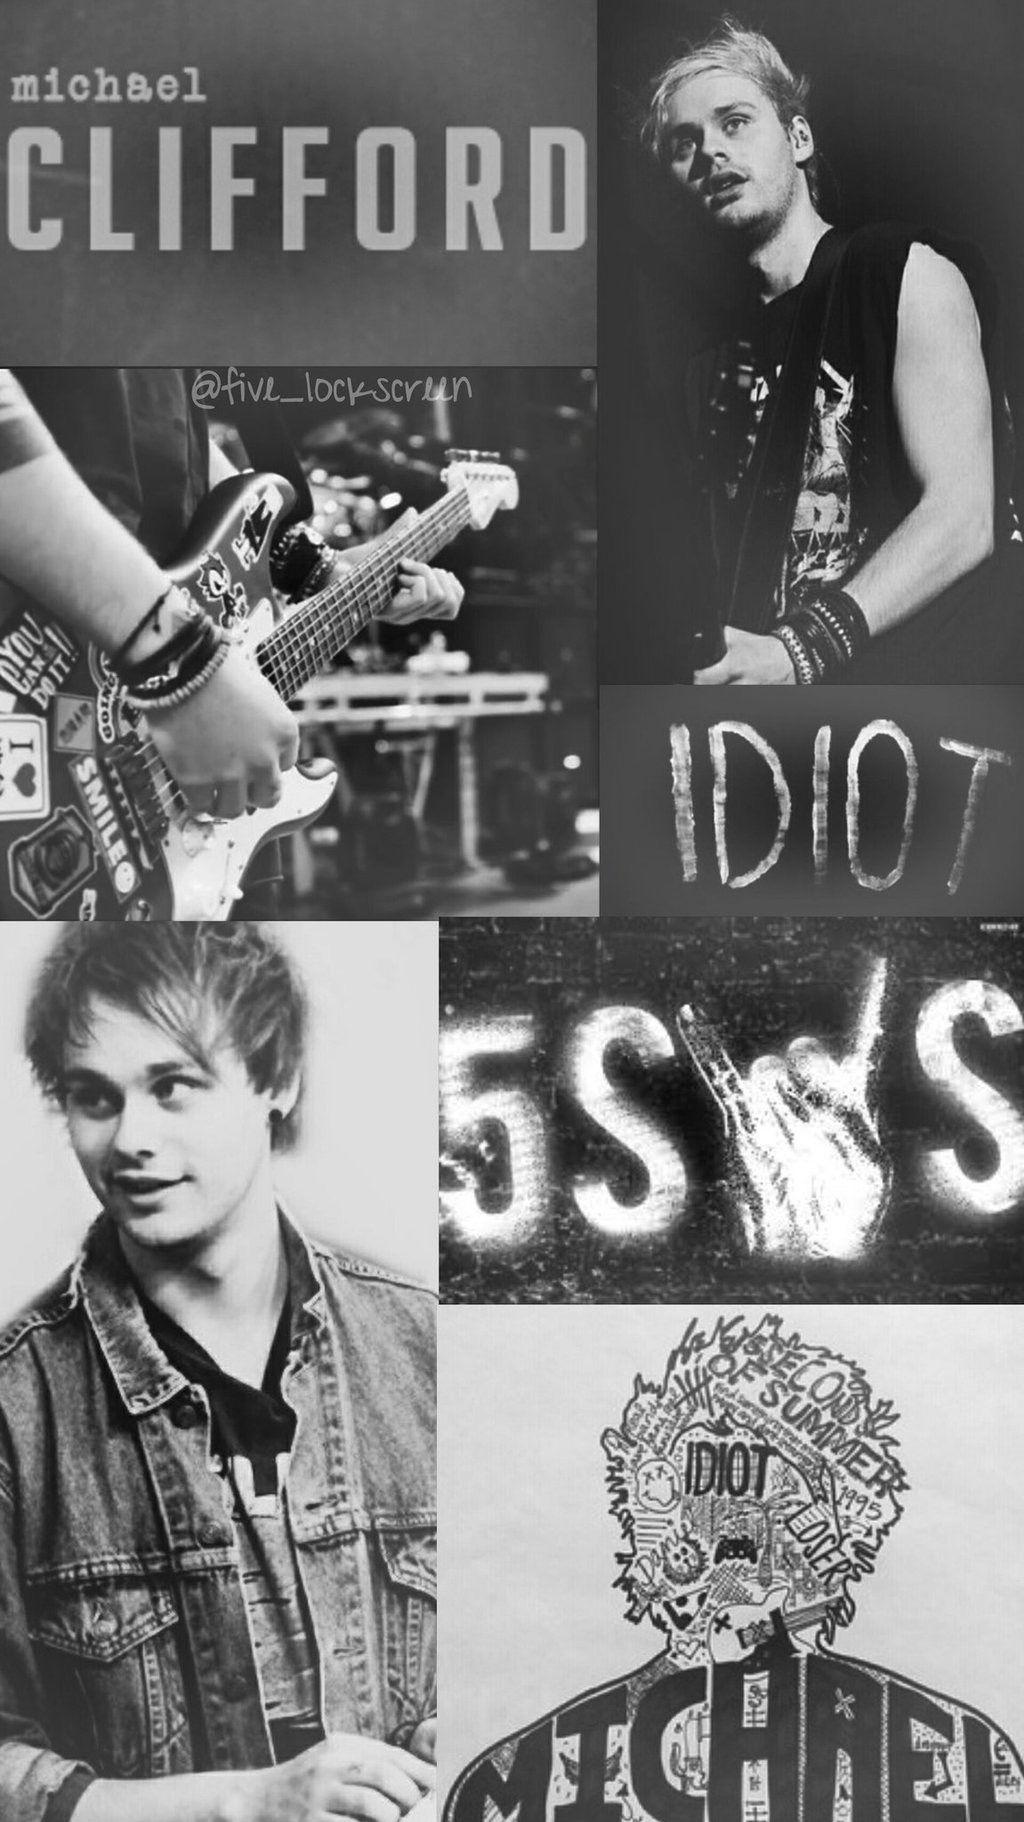 Mikey is my aesthetic. Fangirl stuff. Michael clifford, 5 Seconds